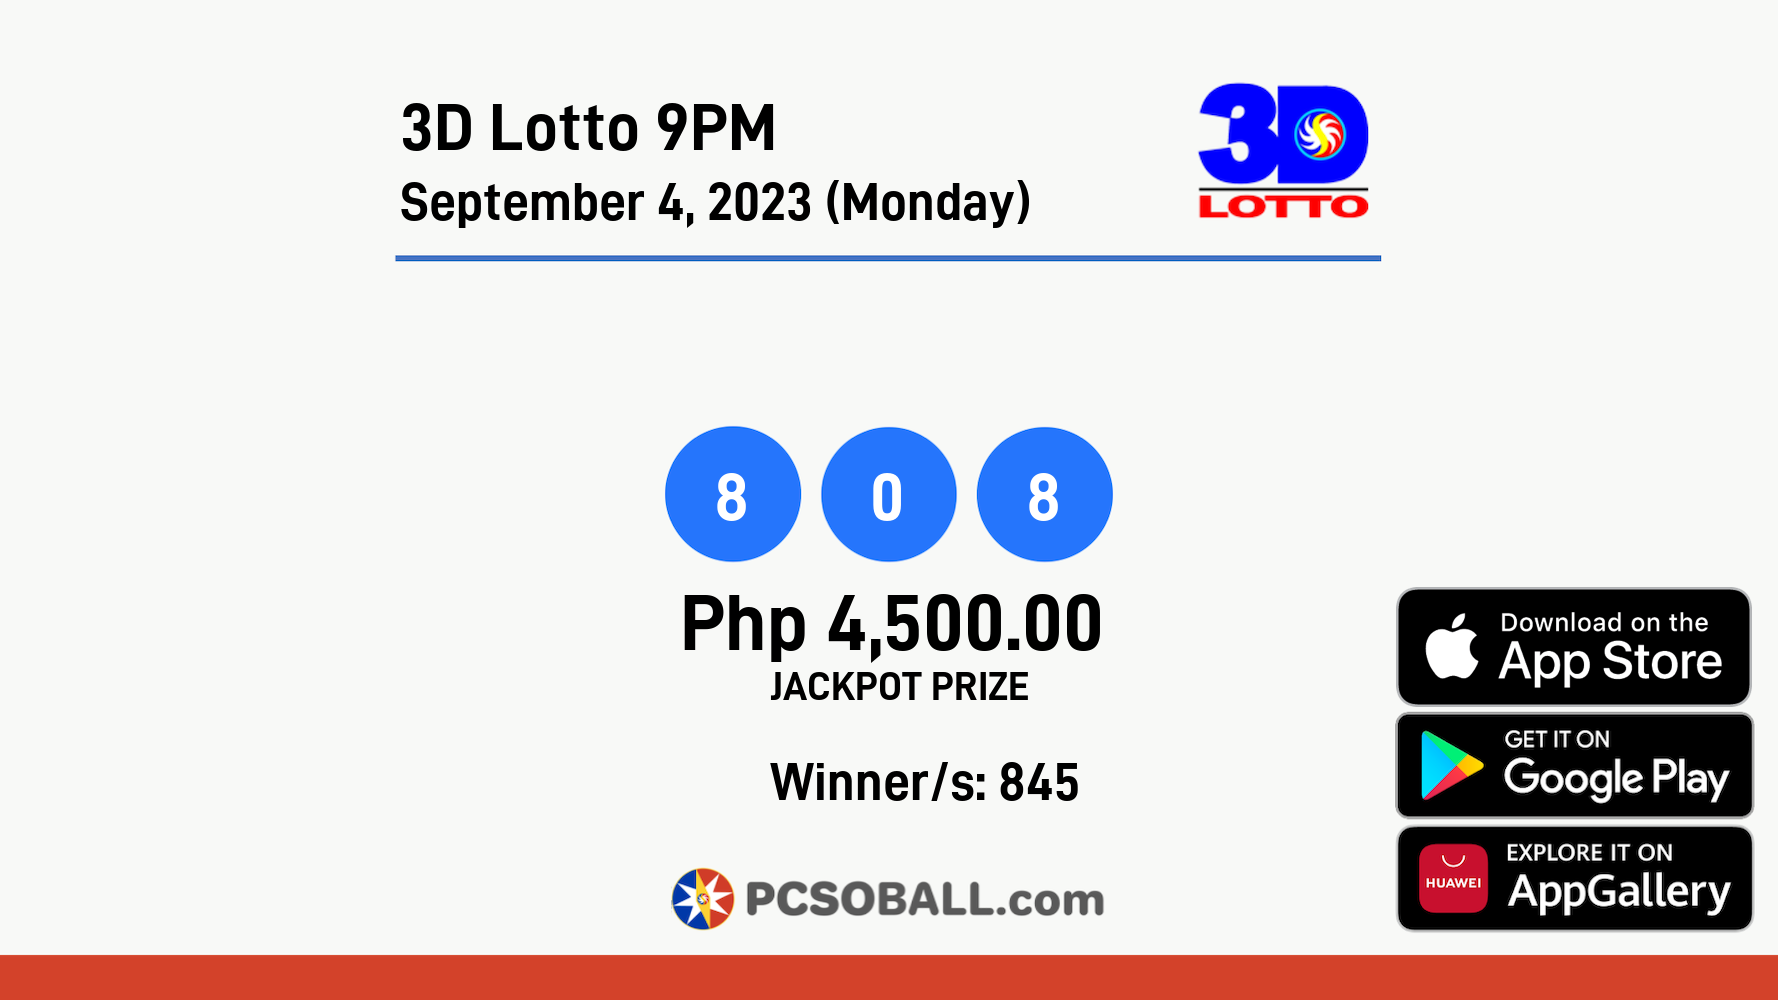 3D Lotto 9PM September 4, 2023 (Monday) Result